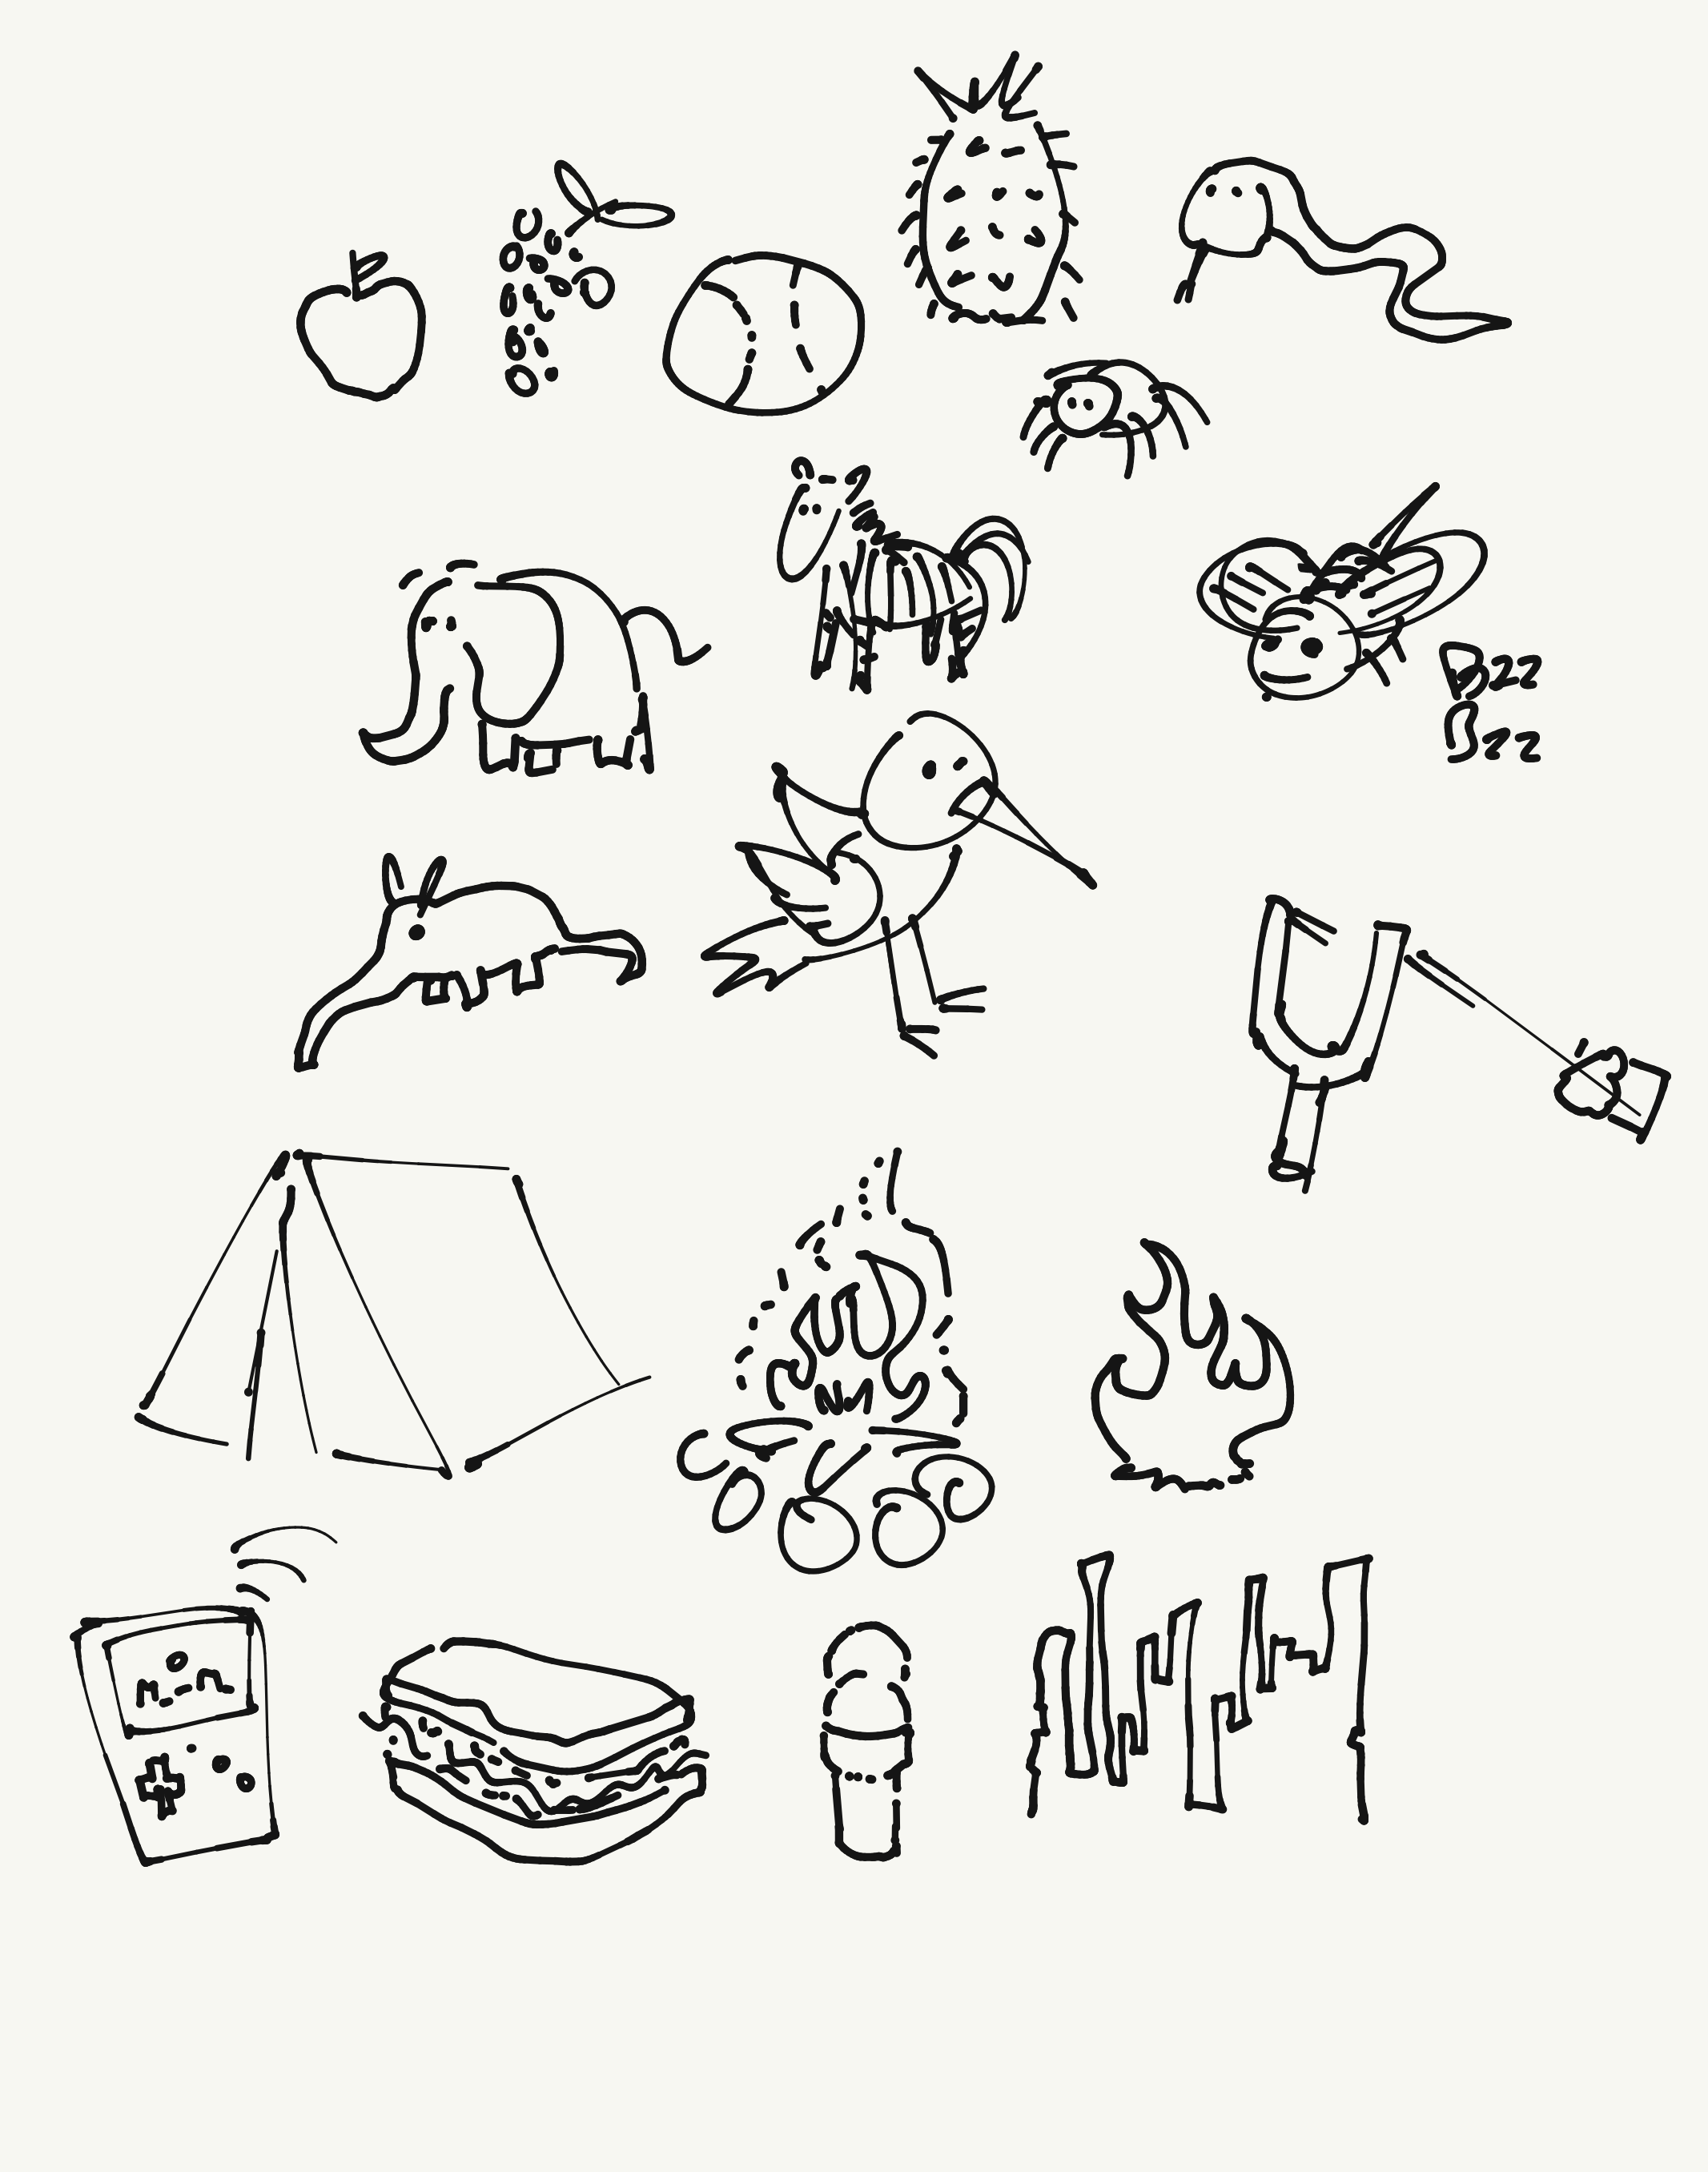 Doodle Catalog 3 - lots of sketches drawings quick visual storytelling note taking examples and ideas 6.png